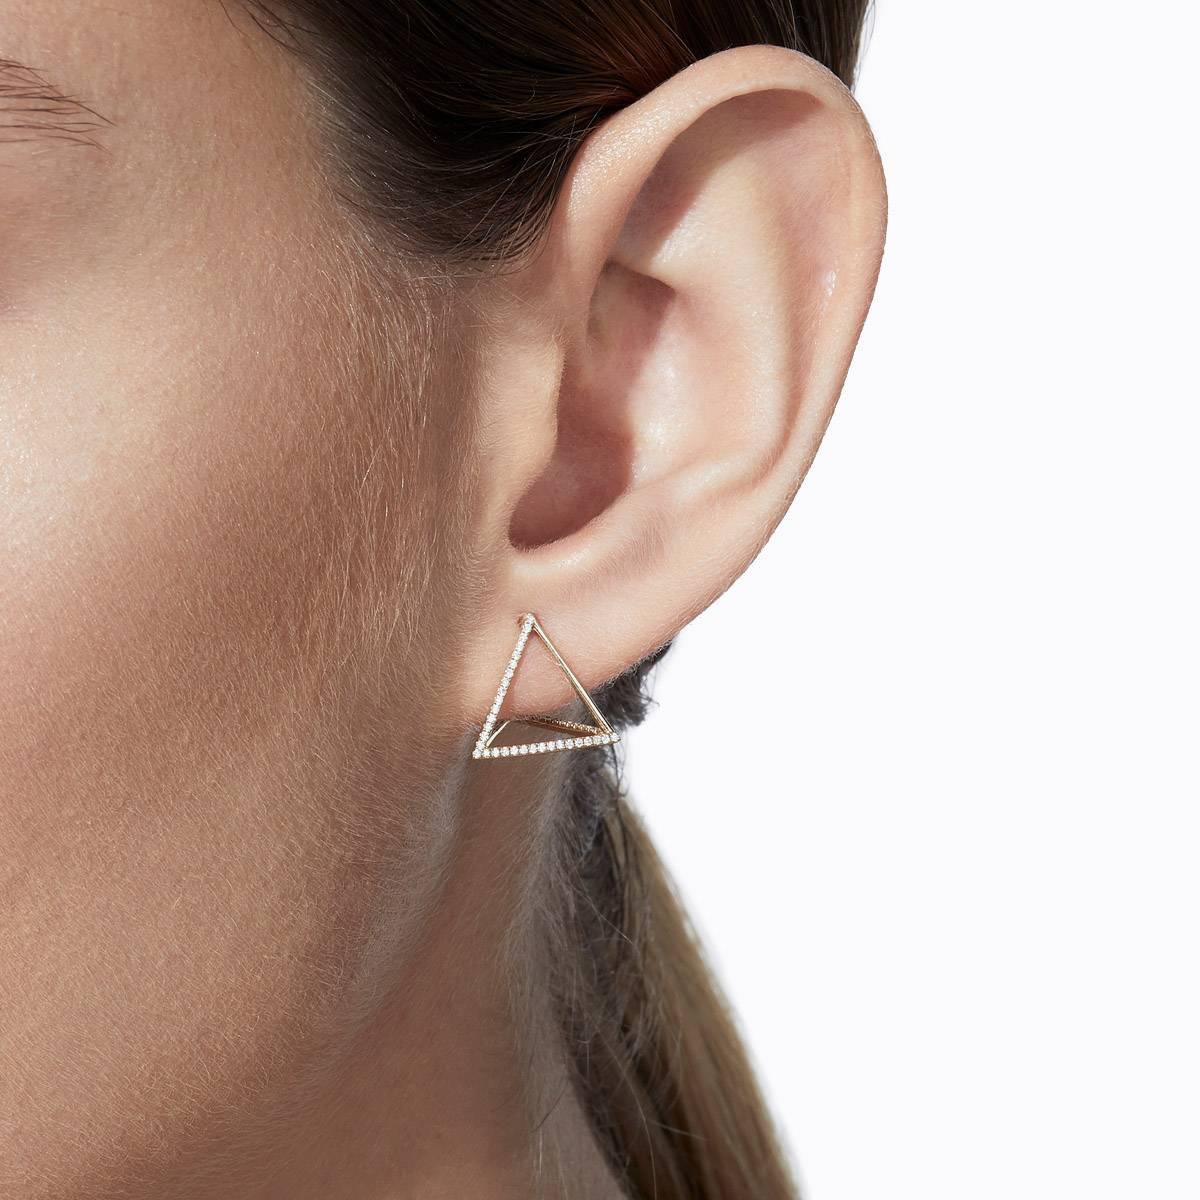 The three dimensional triangle form appears to float seamlessly around the earlobe when worn. One side is an earring post and three lines are set with micro diamonds creating a subtle but luxurious effect. You can alter the point at which the